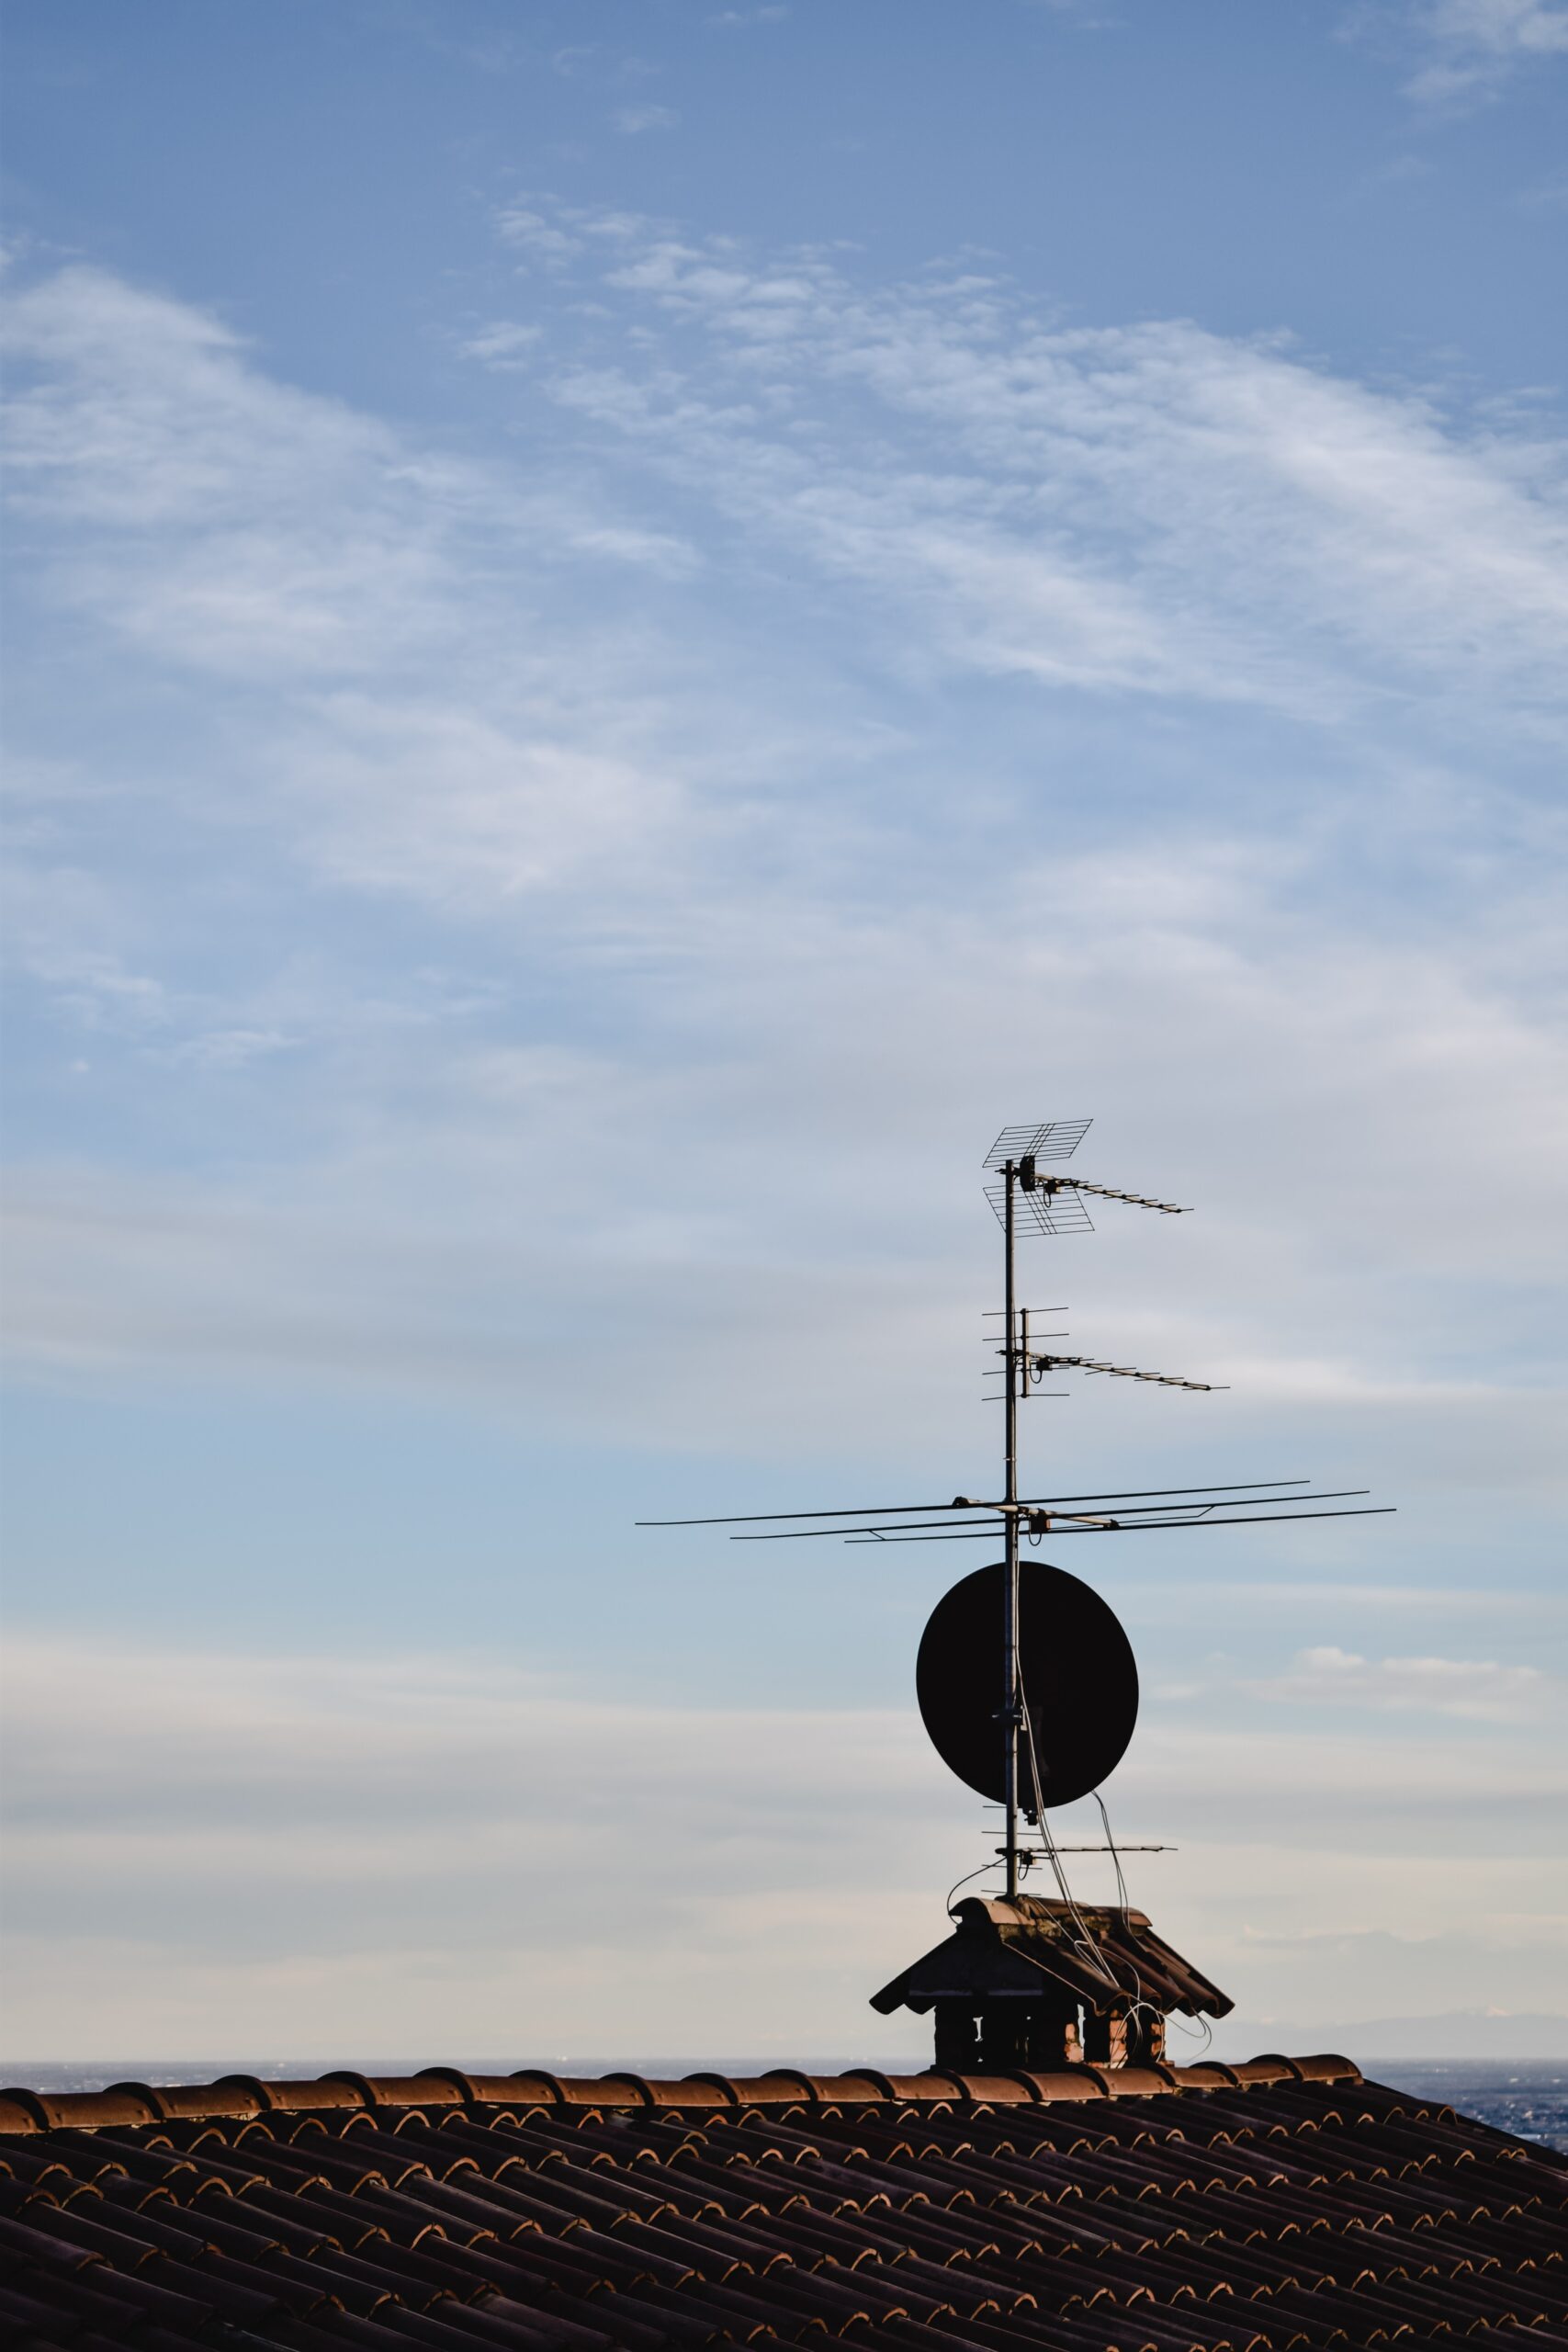 A Tv Antenna on the Roof